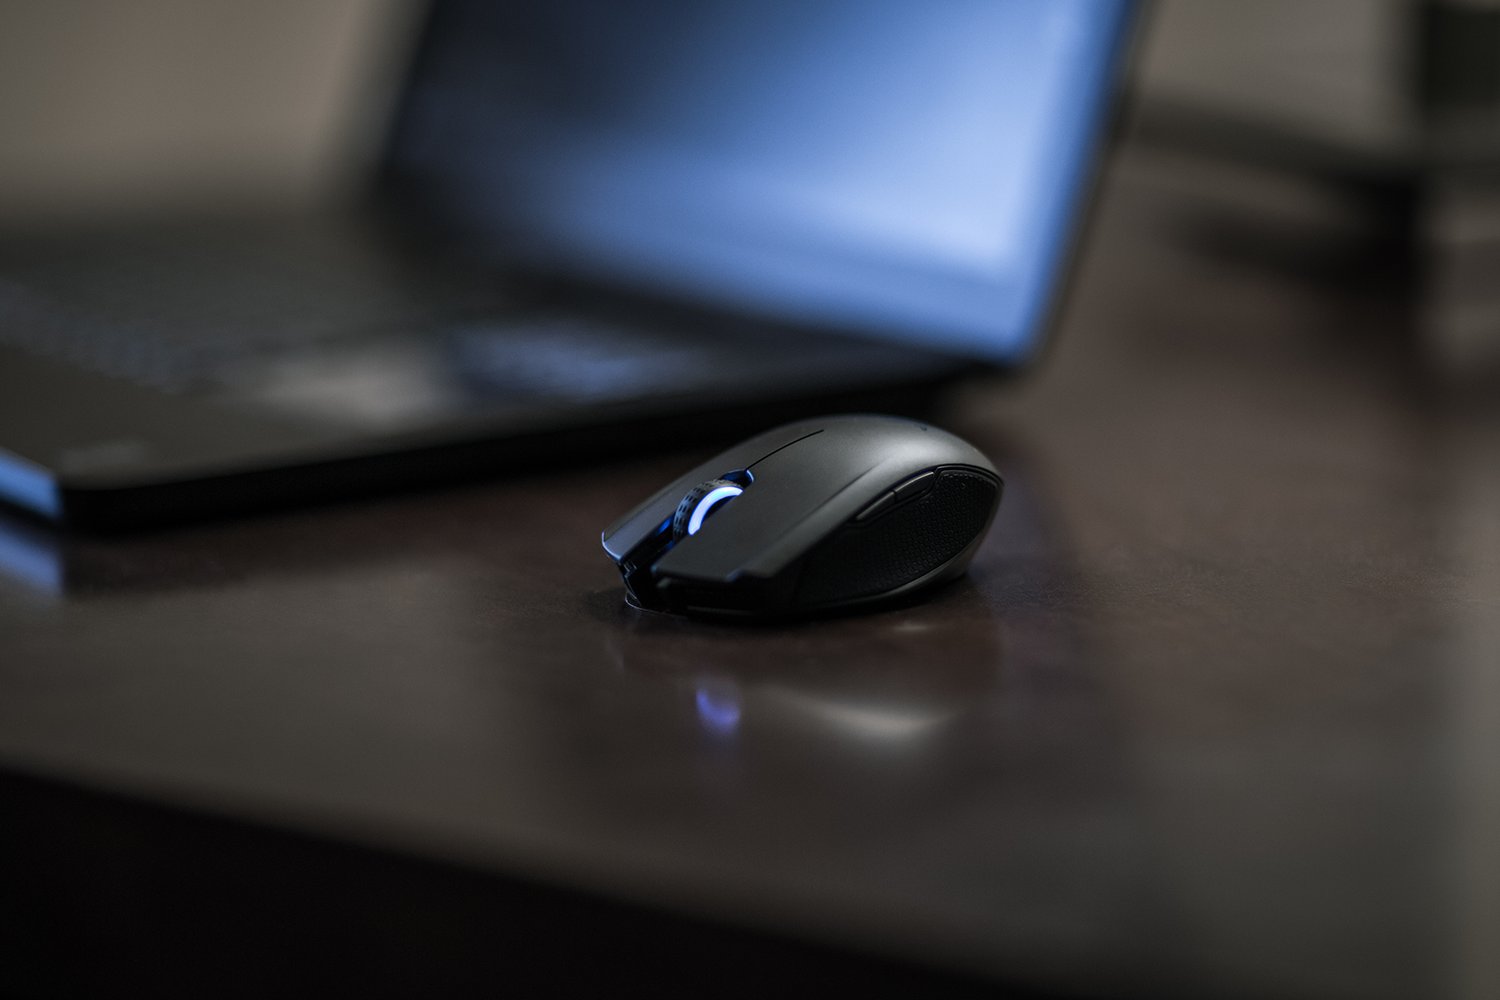 wireless mouse software update 1.0